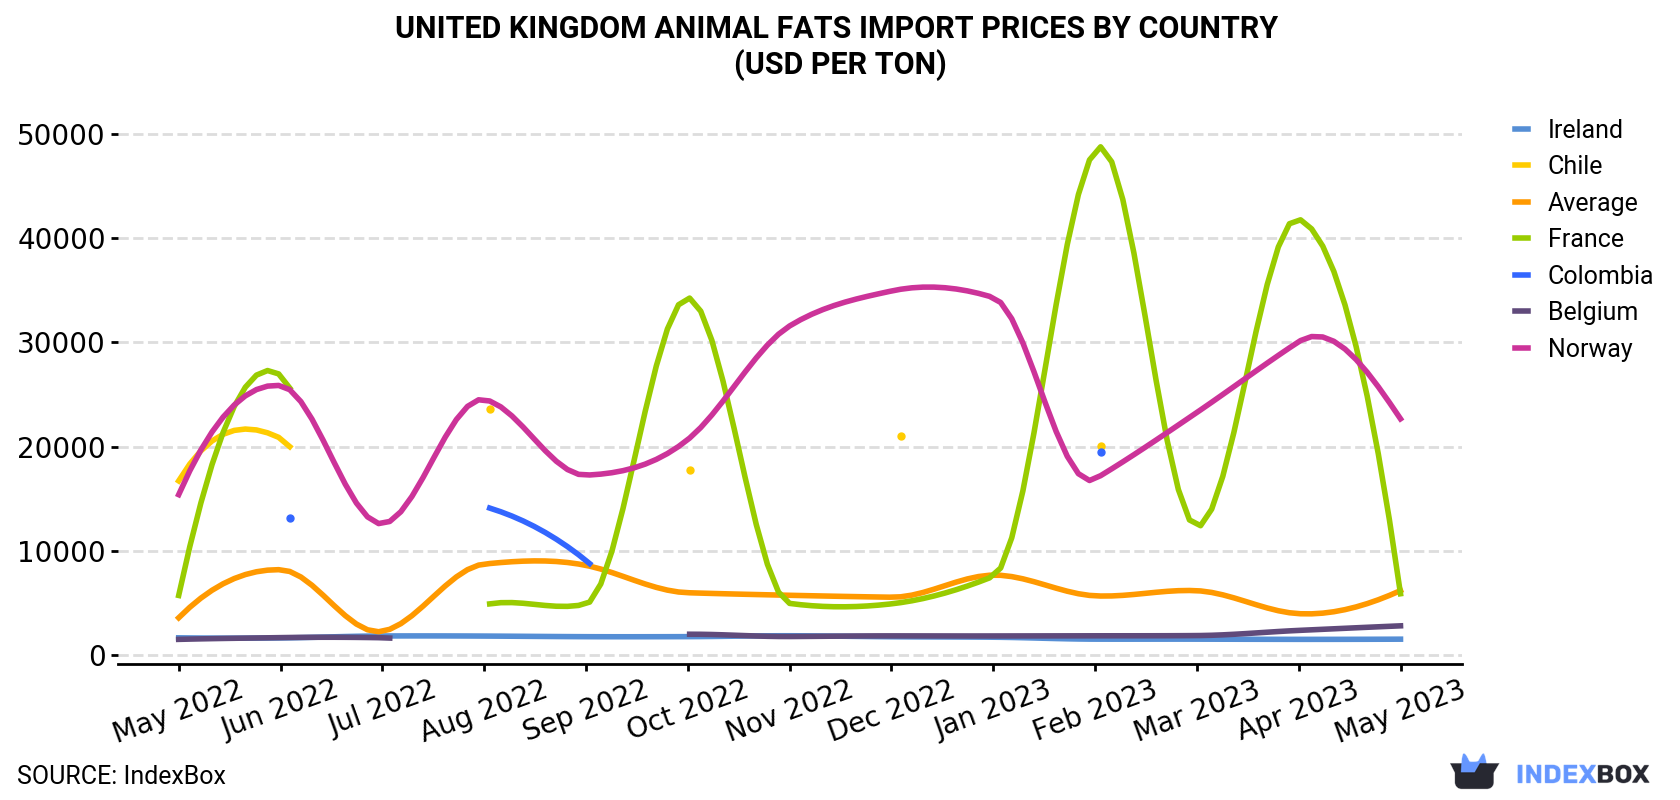 United Kingdom Animal Fats Import Prices By Country (USD Per Ton)